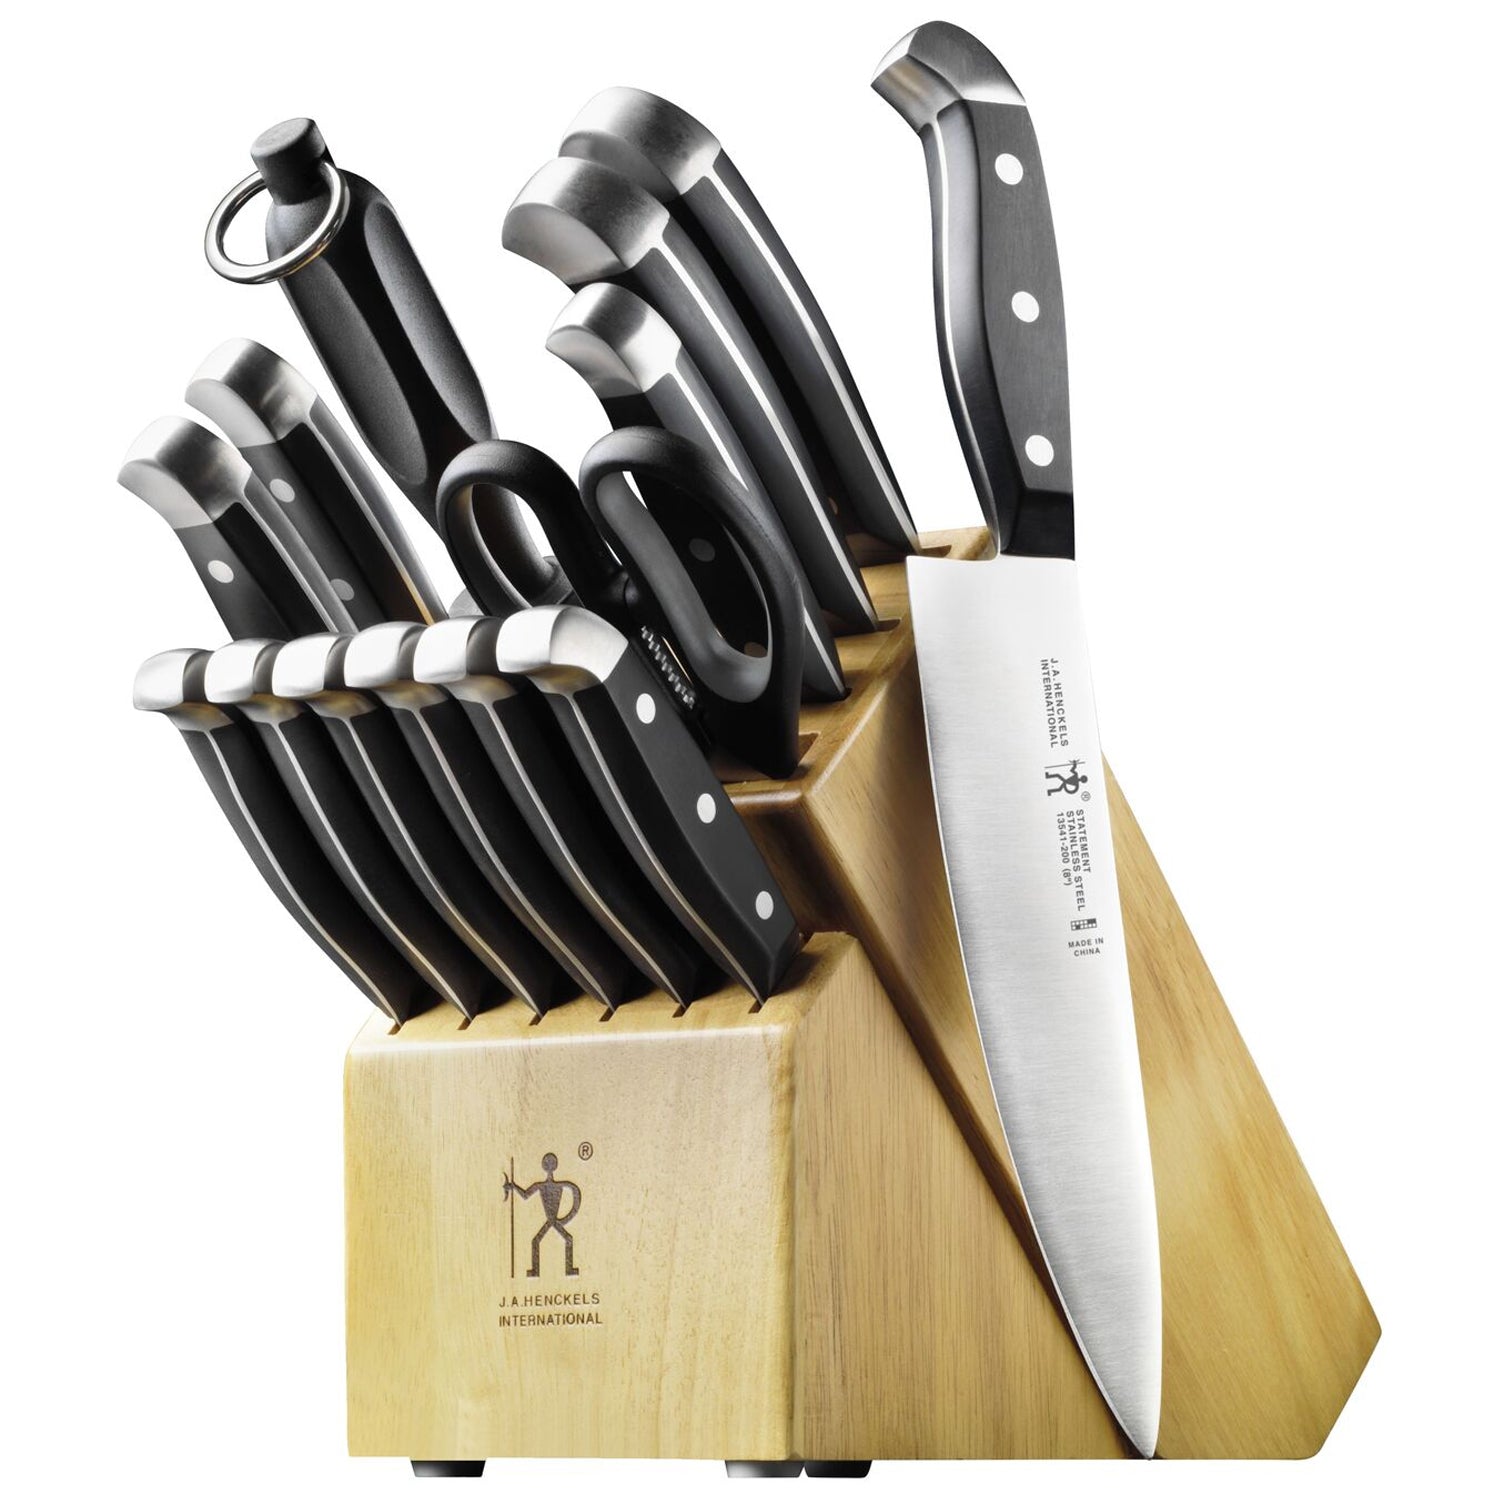 CUISINART Block Knife Set, 15pc Cutlery Knife Set with Steel Blades for  Precise Cutting, Lightweight, Stainless Steel, Durable & Dishwasher Safe